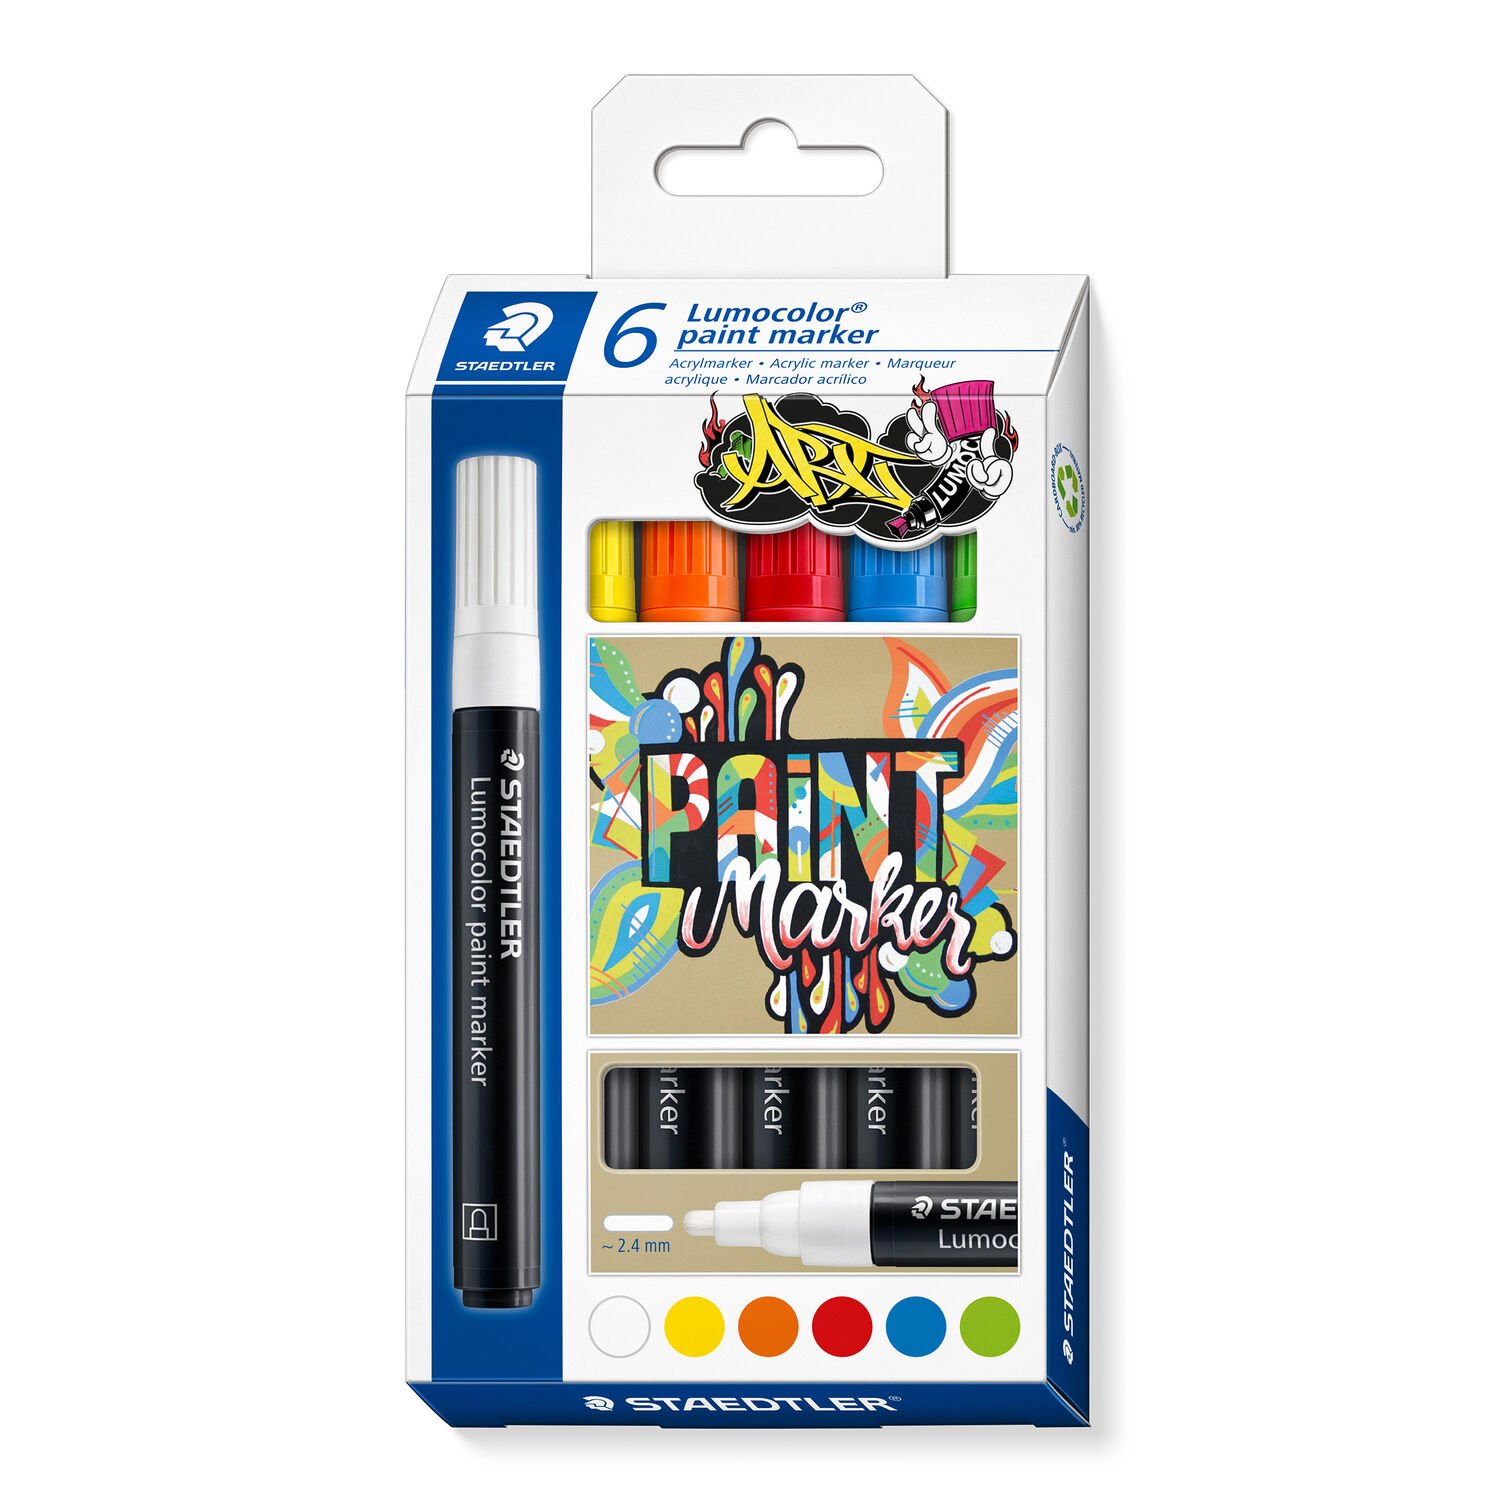 Lumocolor® paint marker 349 - Acrylic marker with bullet tip